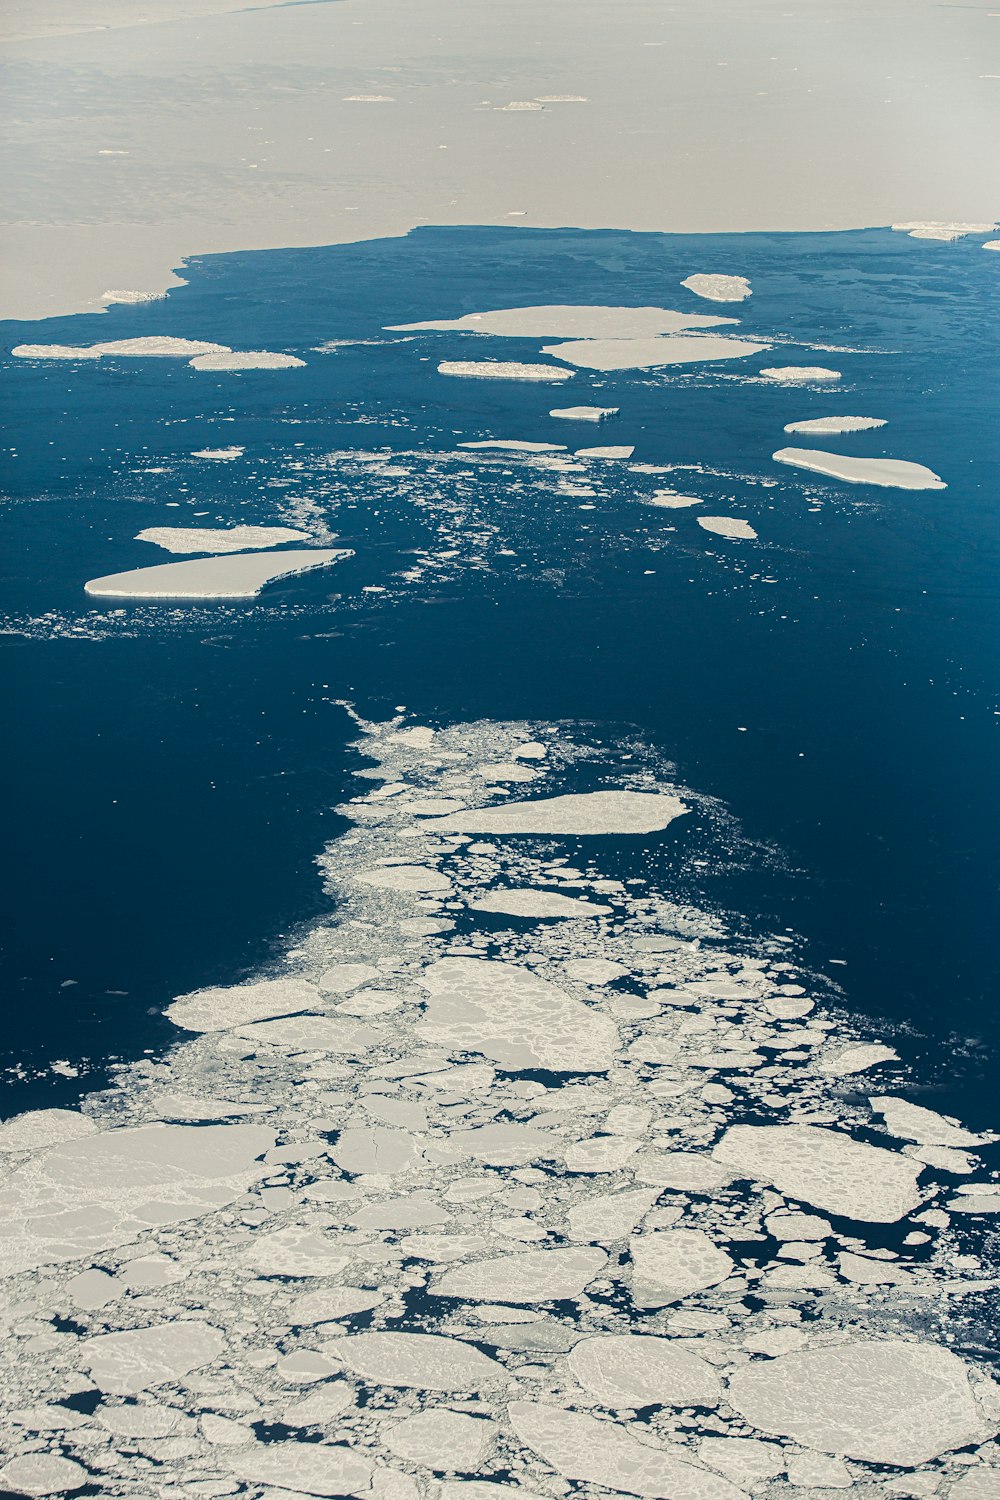 an aerial view of ice floes in the ocean